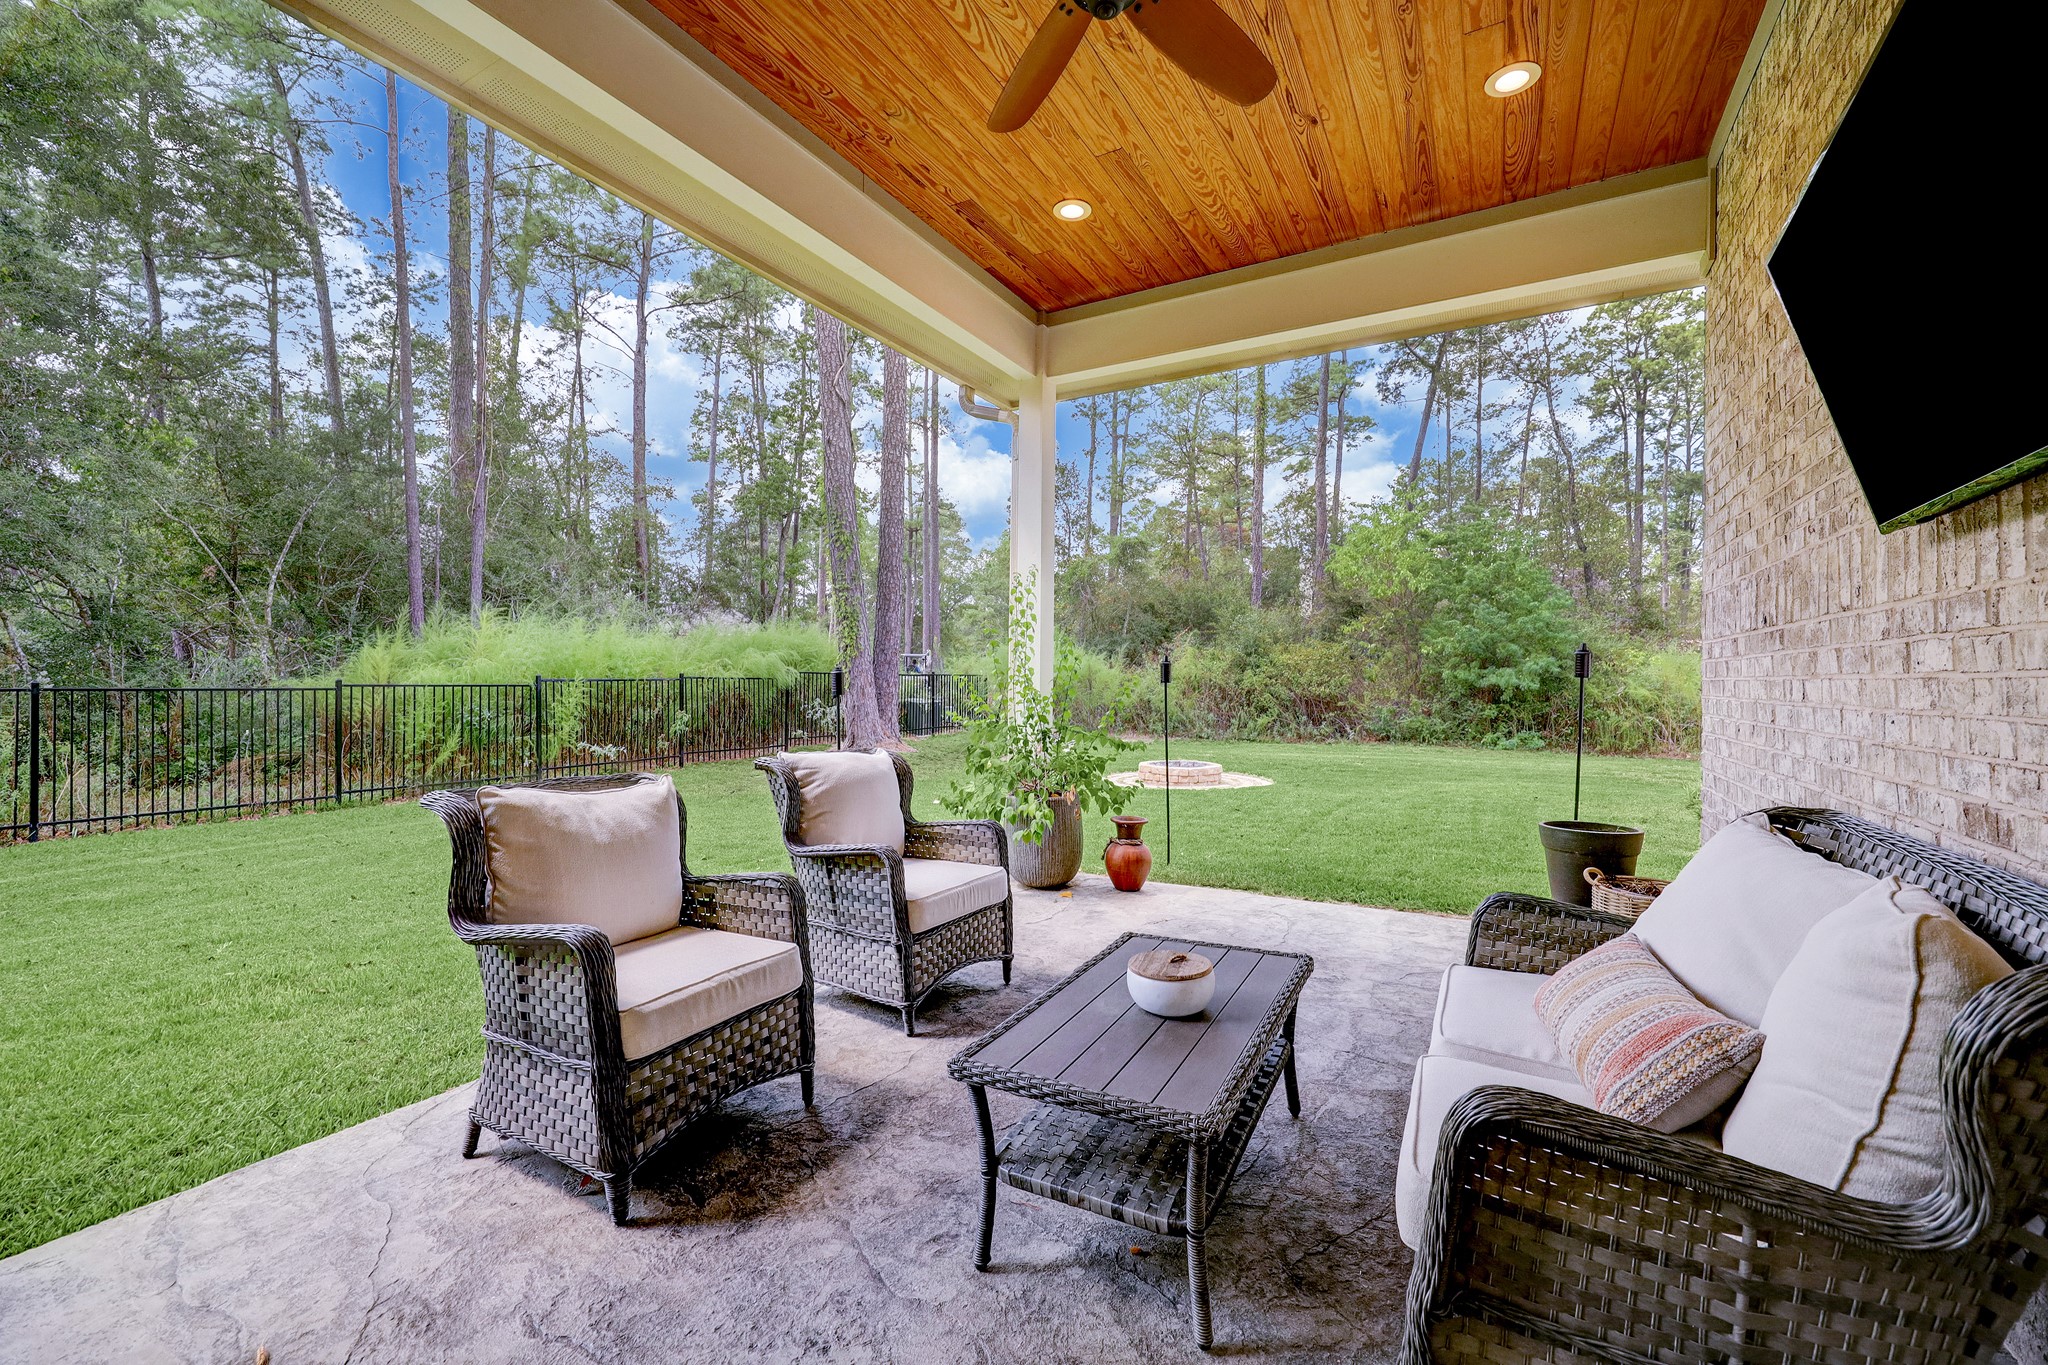 Outside, the expansive backyard is an oasis of tranquility, surrounded by the beauty of nature.